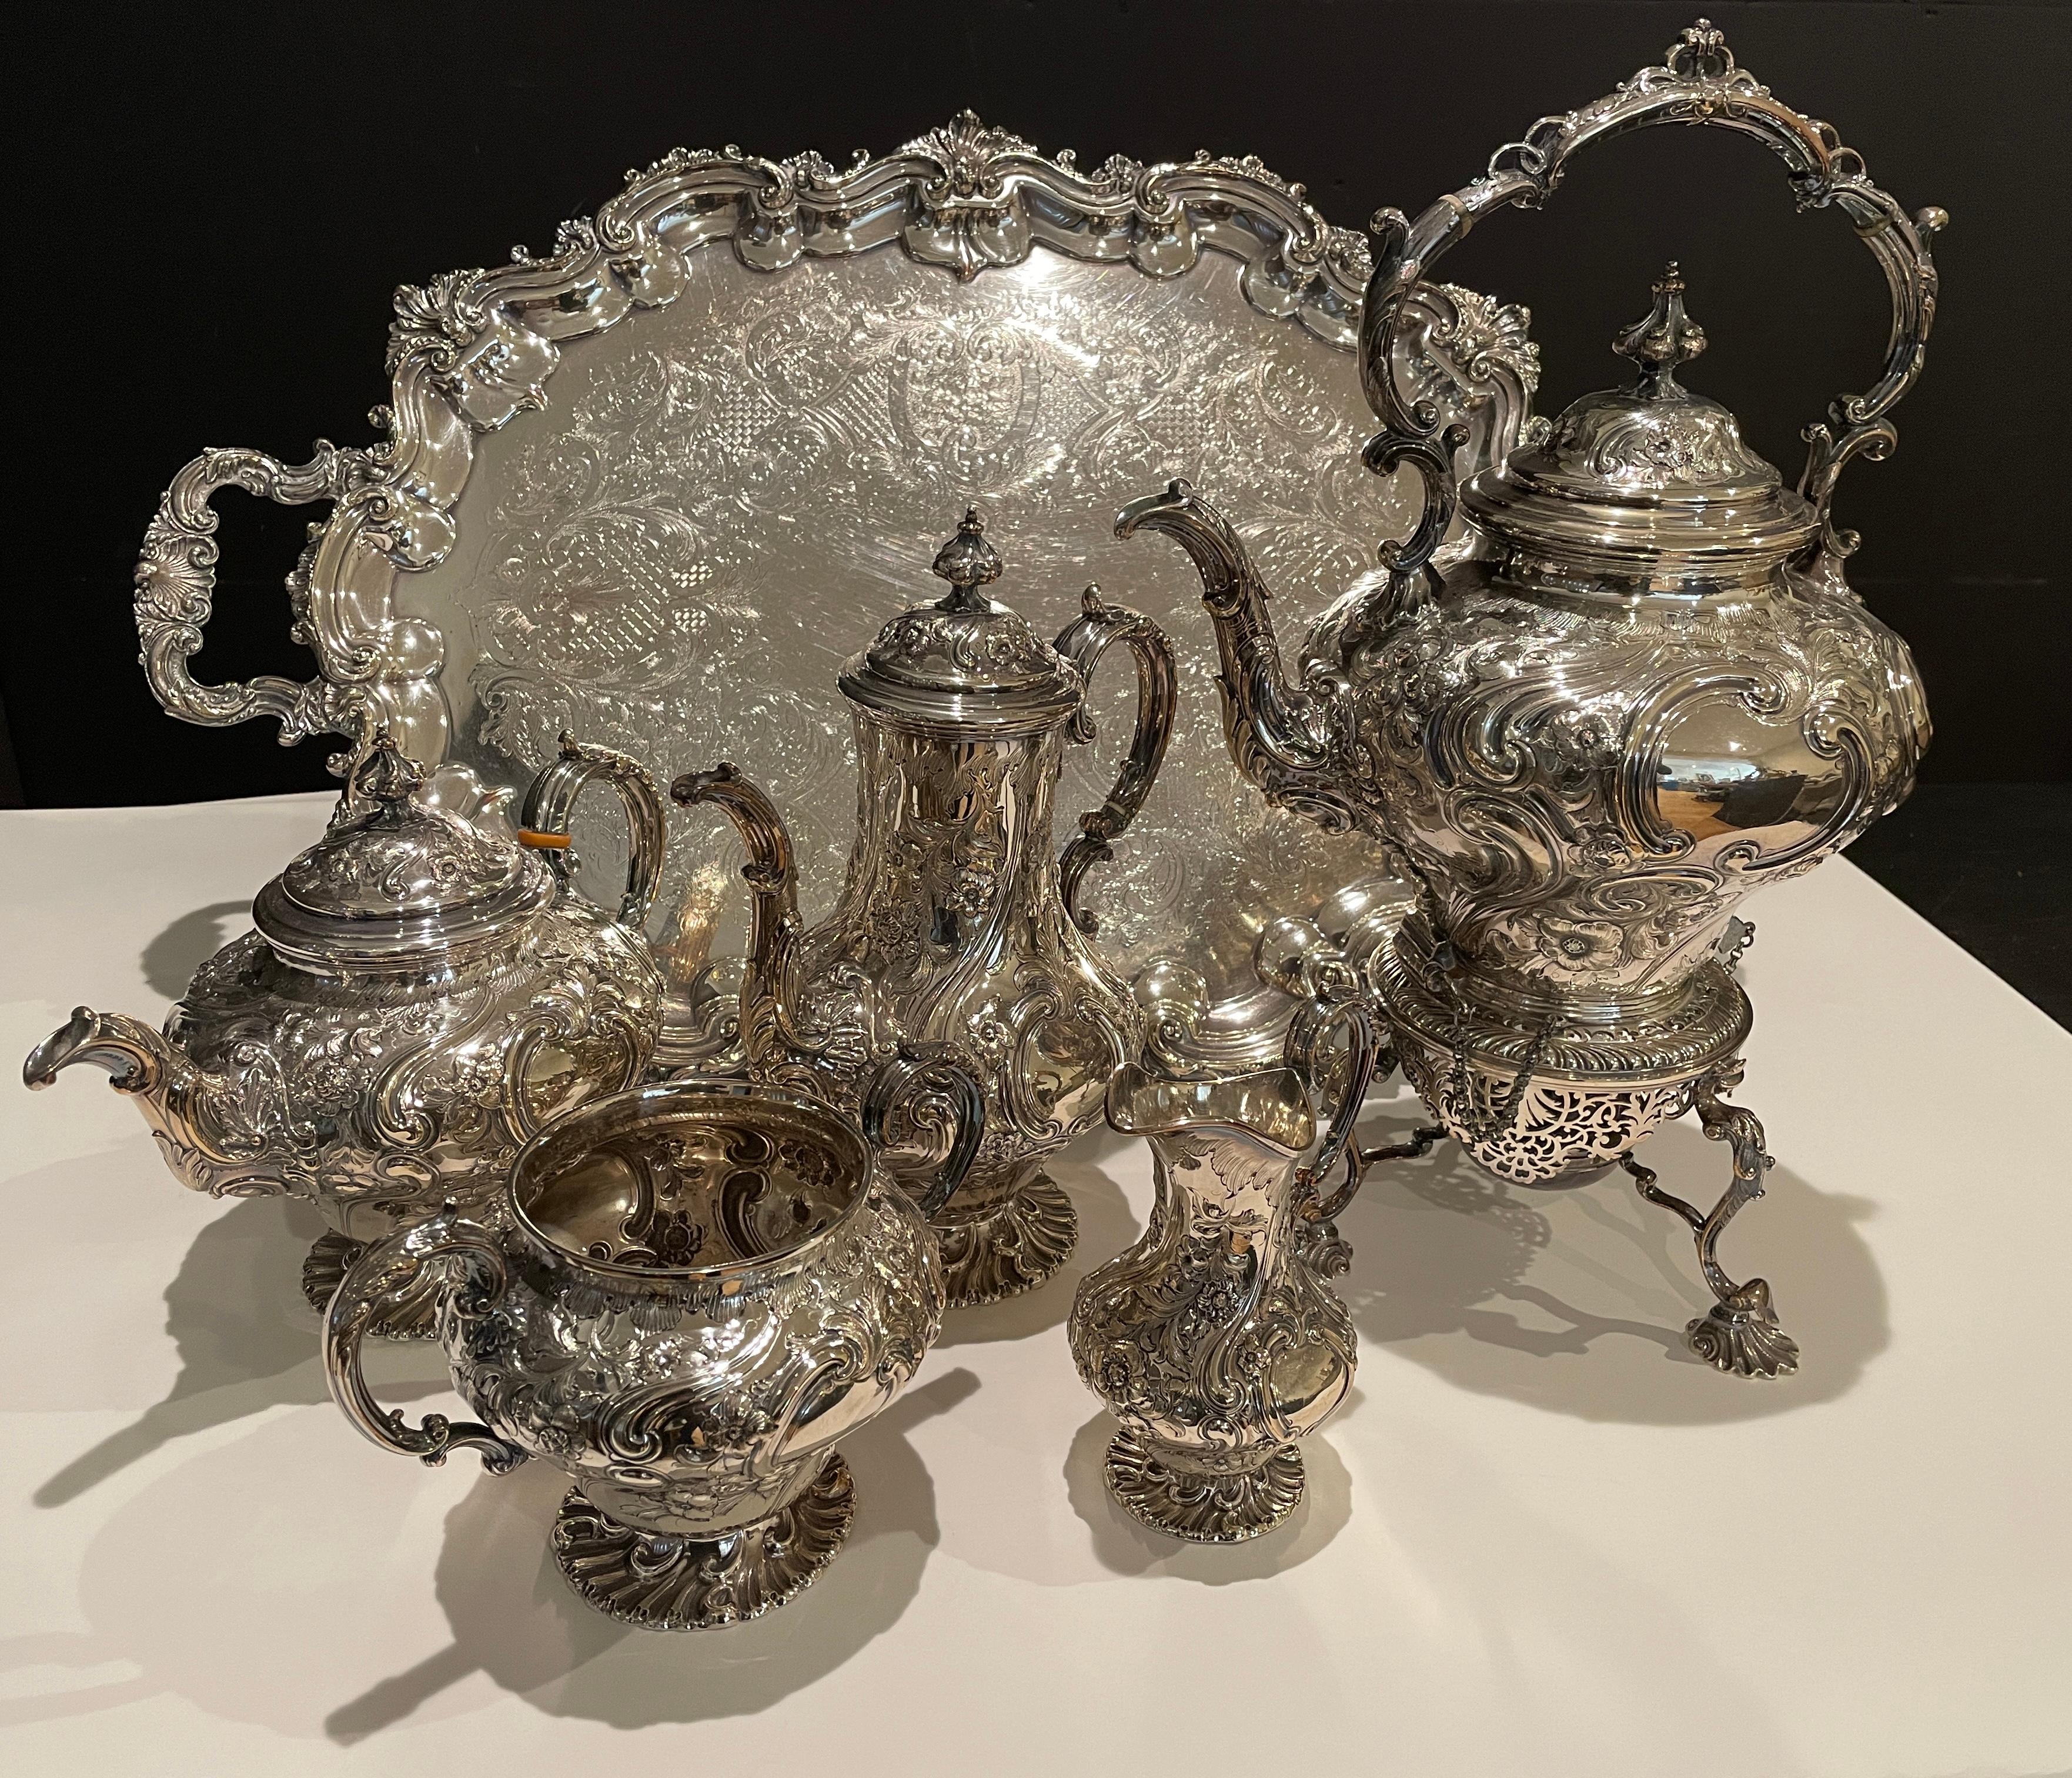 Fine quality English Rococo-style 6-piece Martin Hall & Co. silver plate tea/coffee set with associated tray. Large tray with coffee and tea pot, sugar and creamer and large tipping kettle on tripod stand. Fully marked with the addition of the